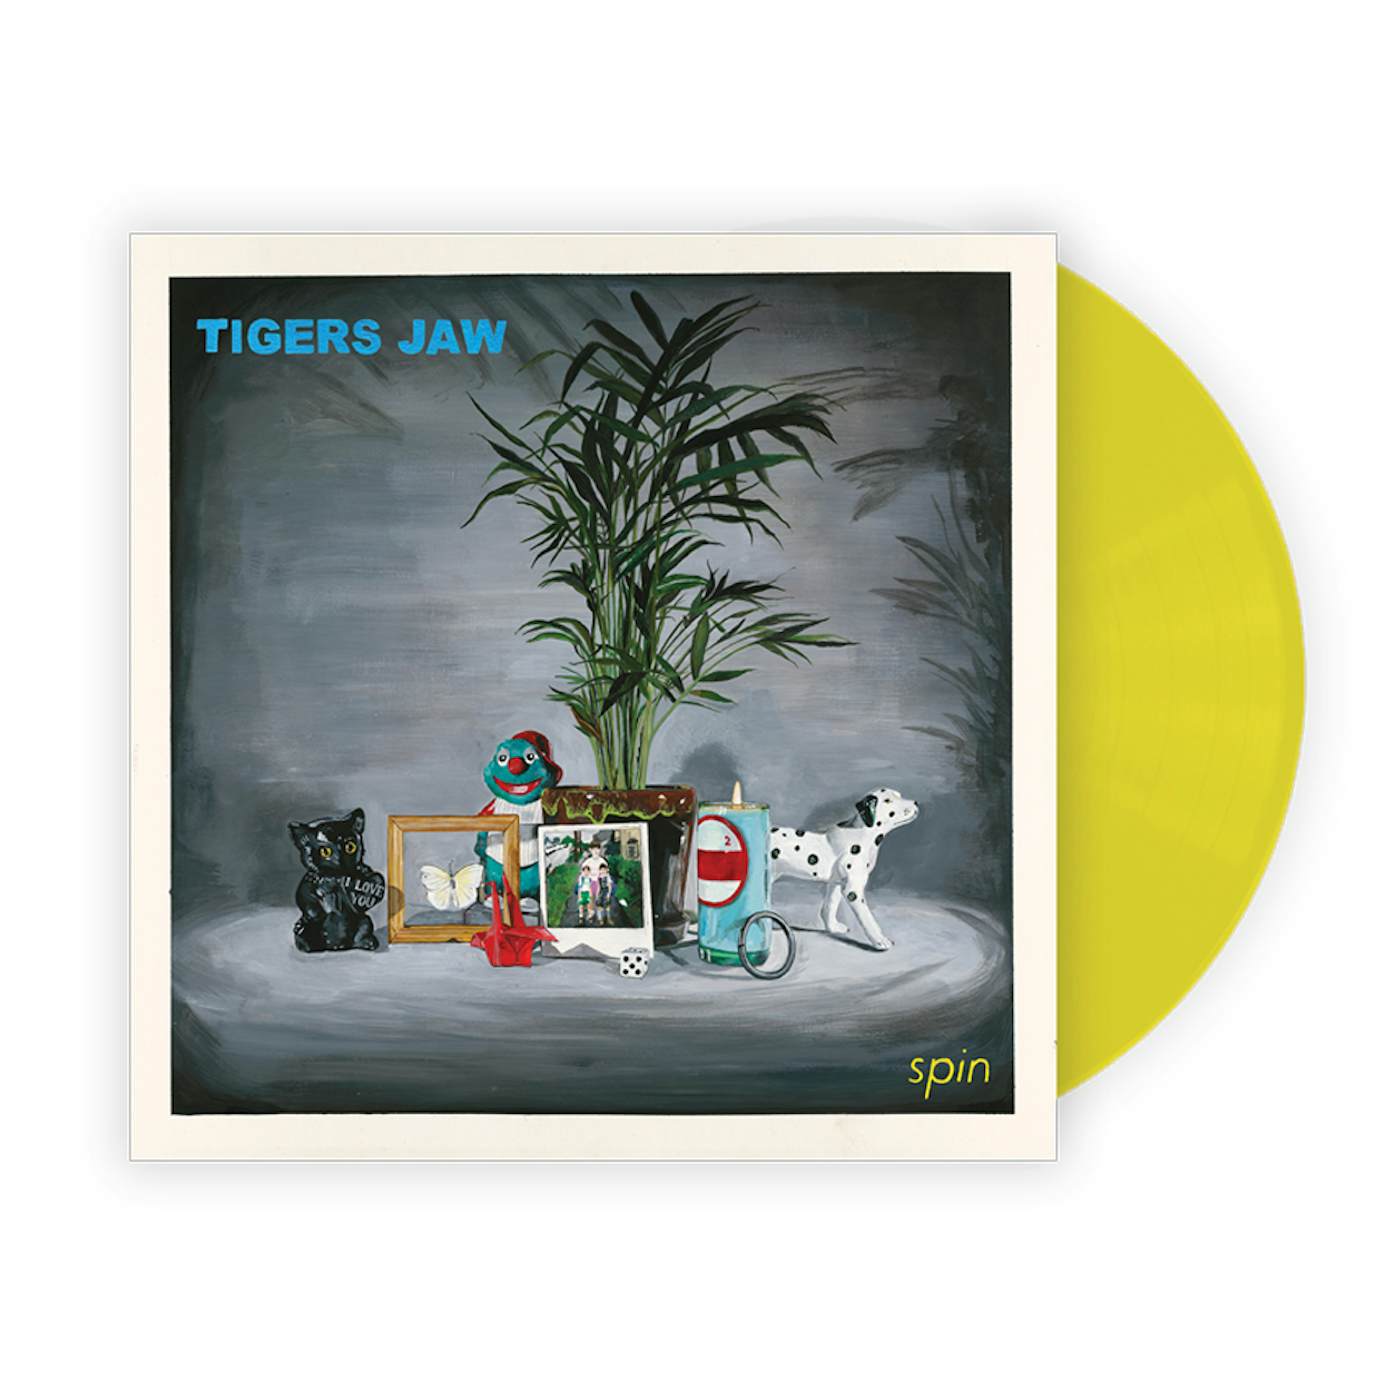 Tigers Jaw spin (Yellow Tour Vinyl)